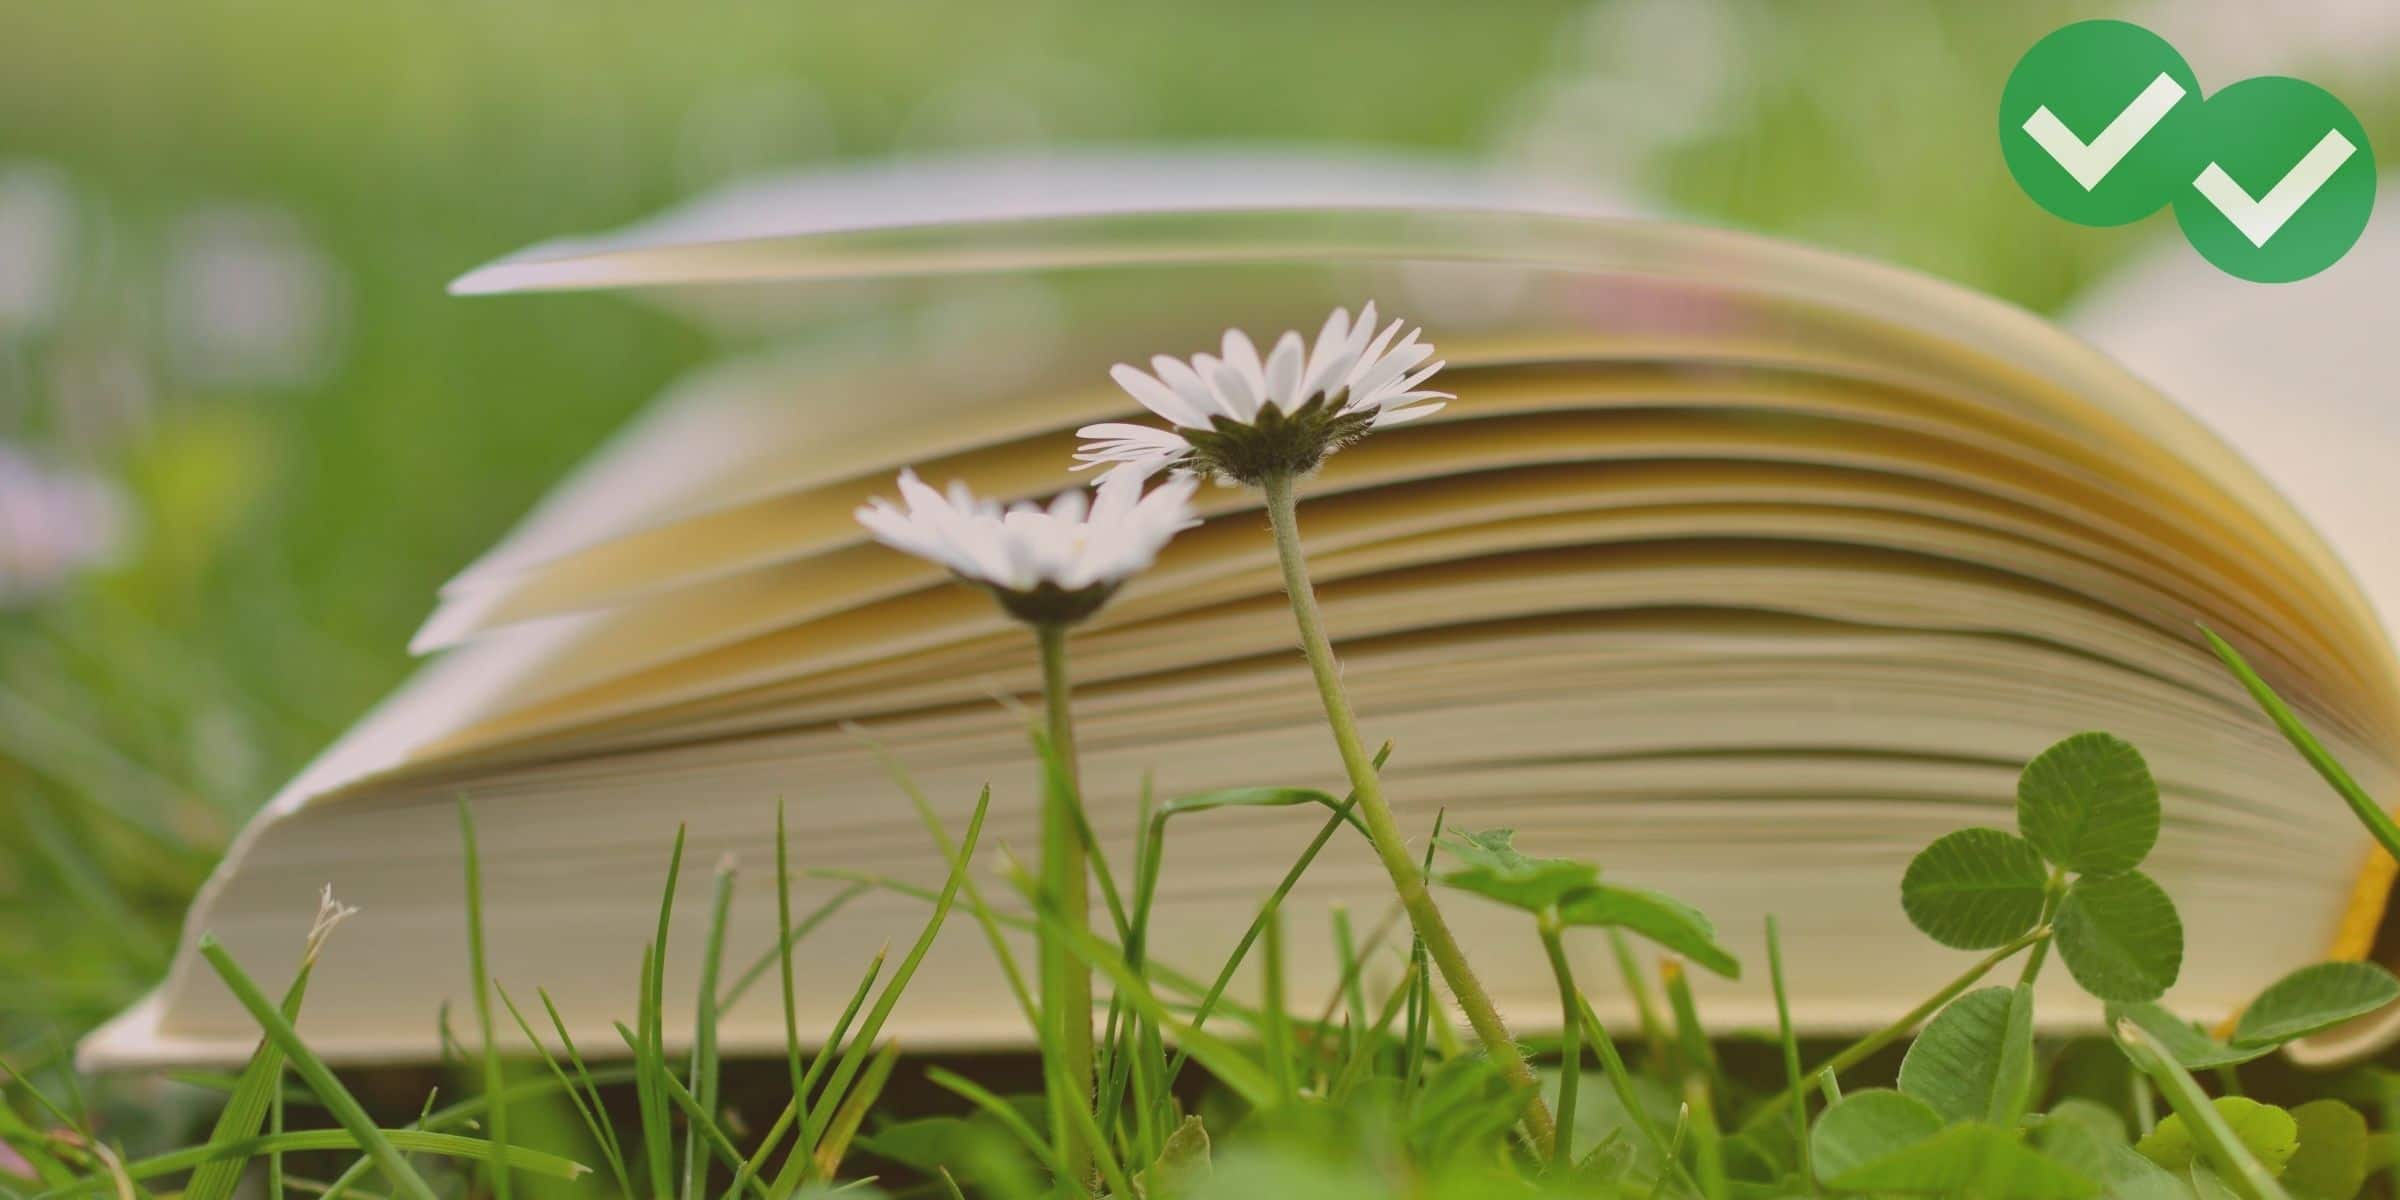 Open book lying in grass and flowers representing TOEFL independent writing topics - image by Magoosh